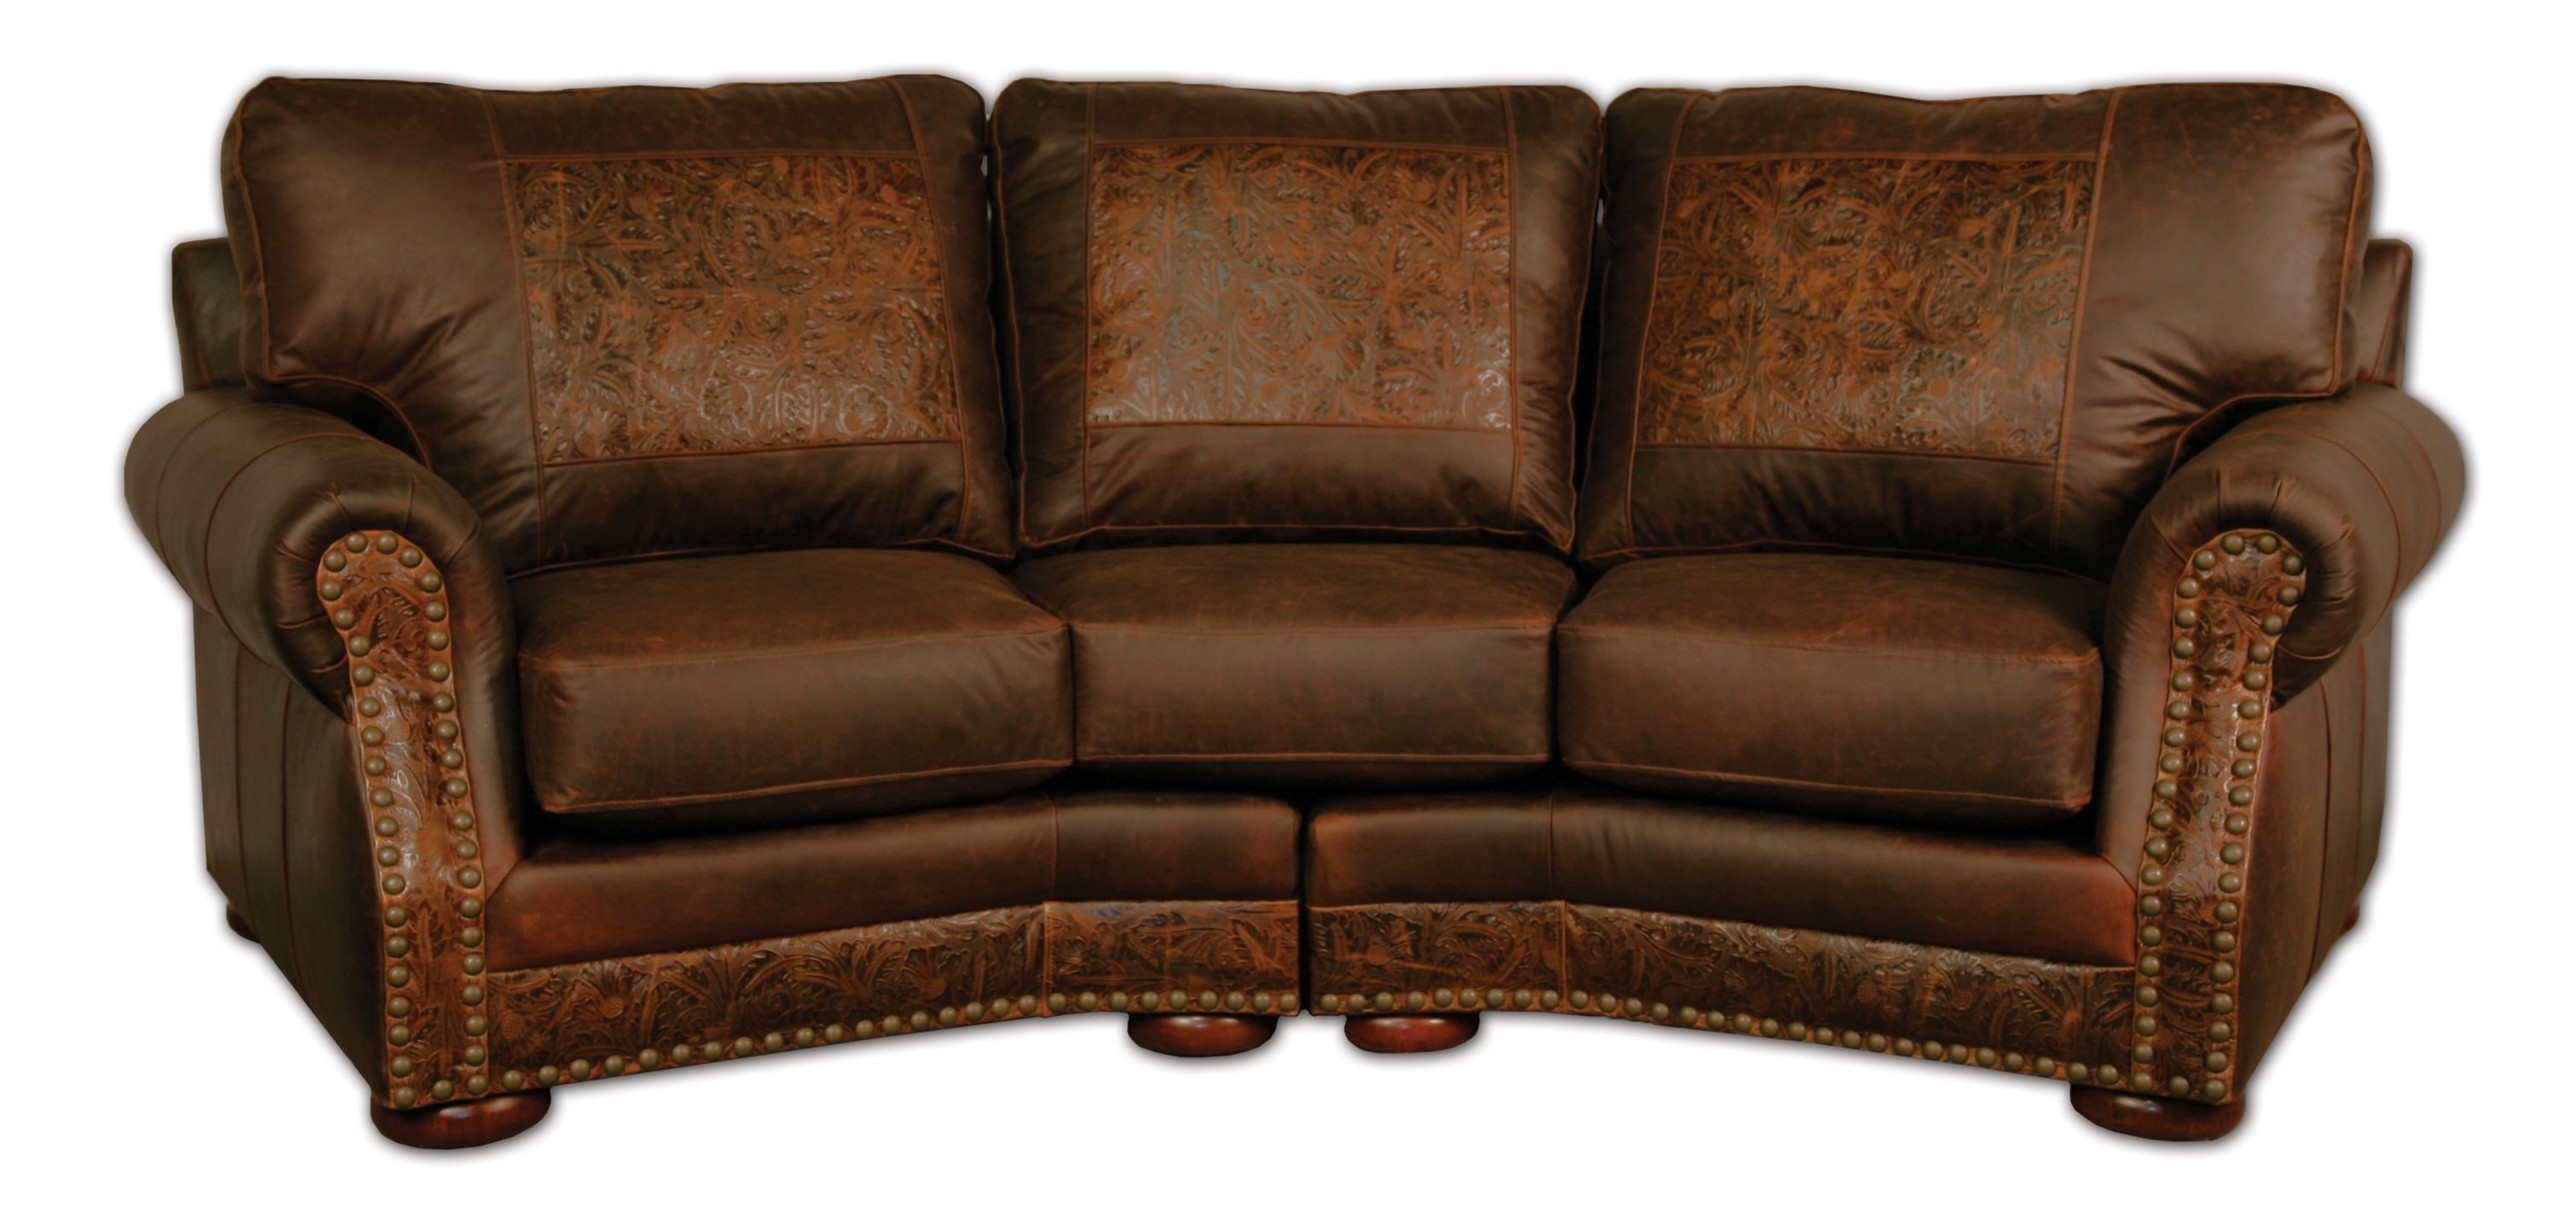 Curved leather sofa with tooled leather western